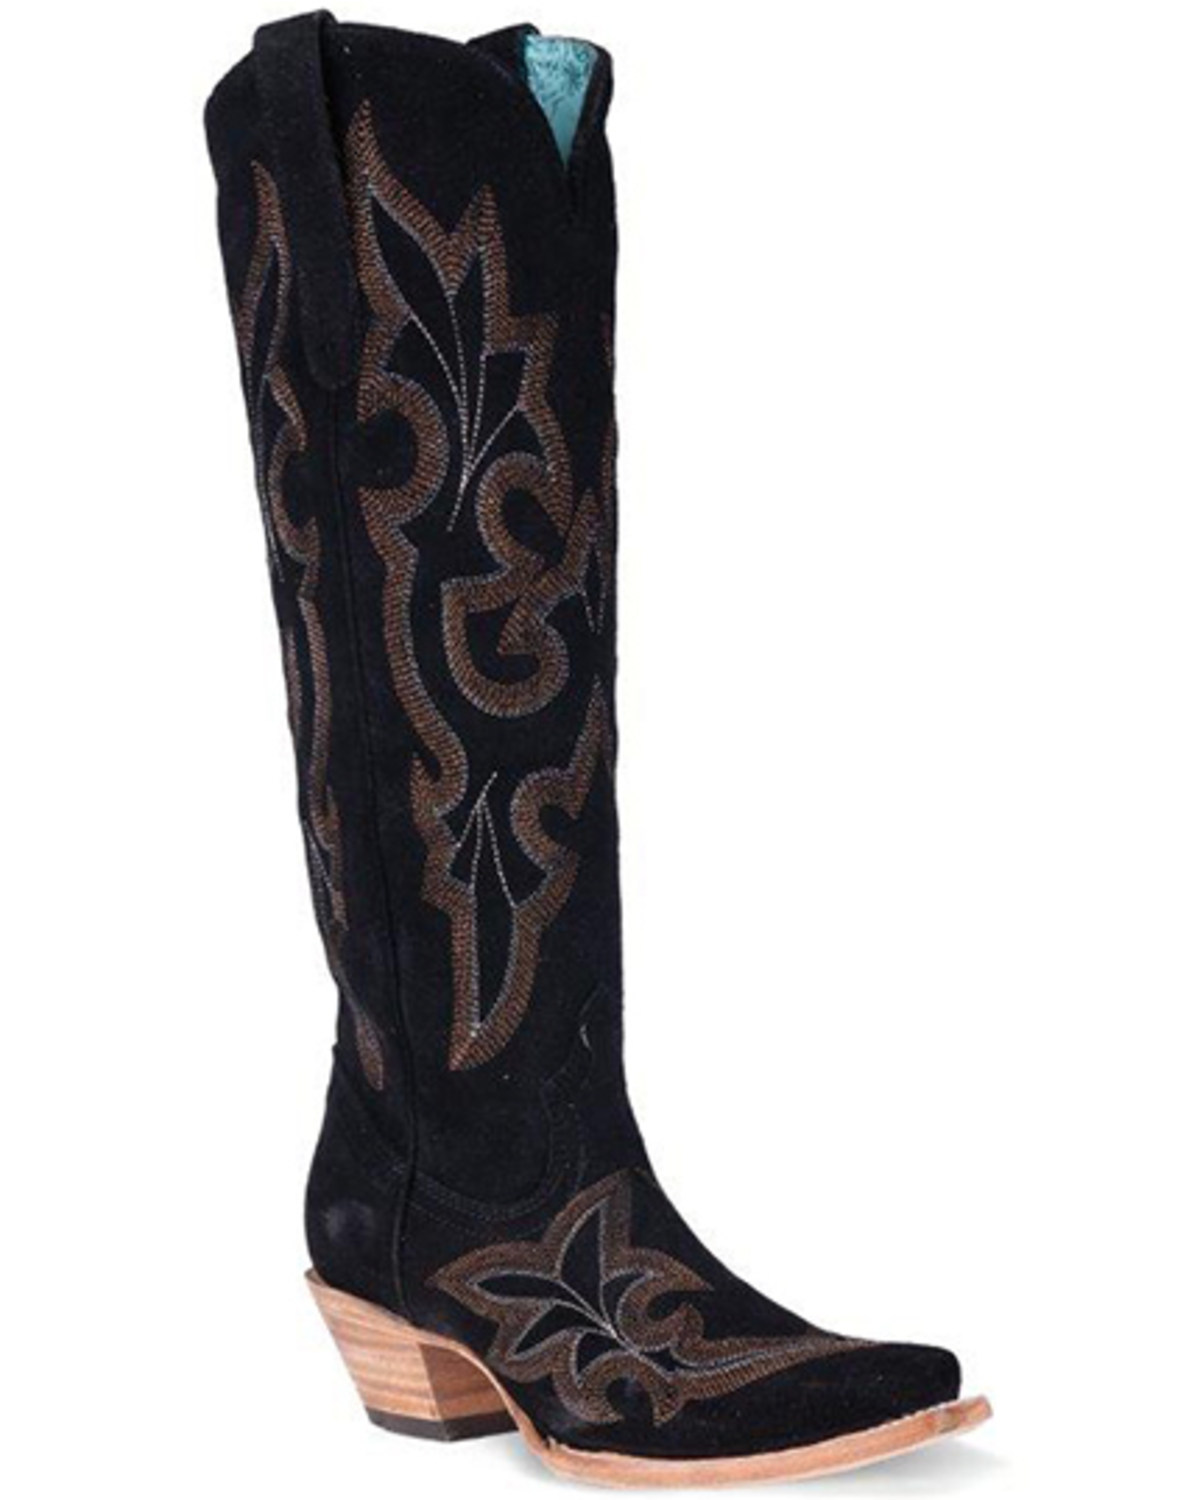 Corral Women's Suede Embroidered Tall Western Boots - Snip Toe